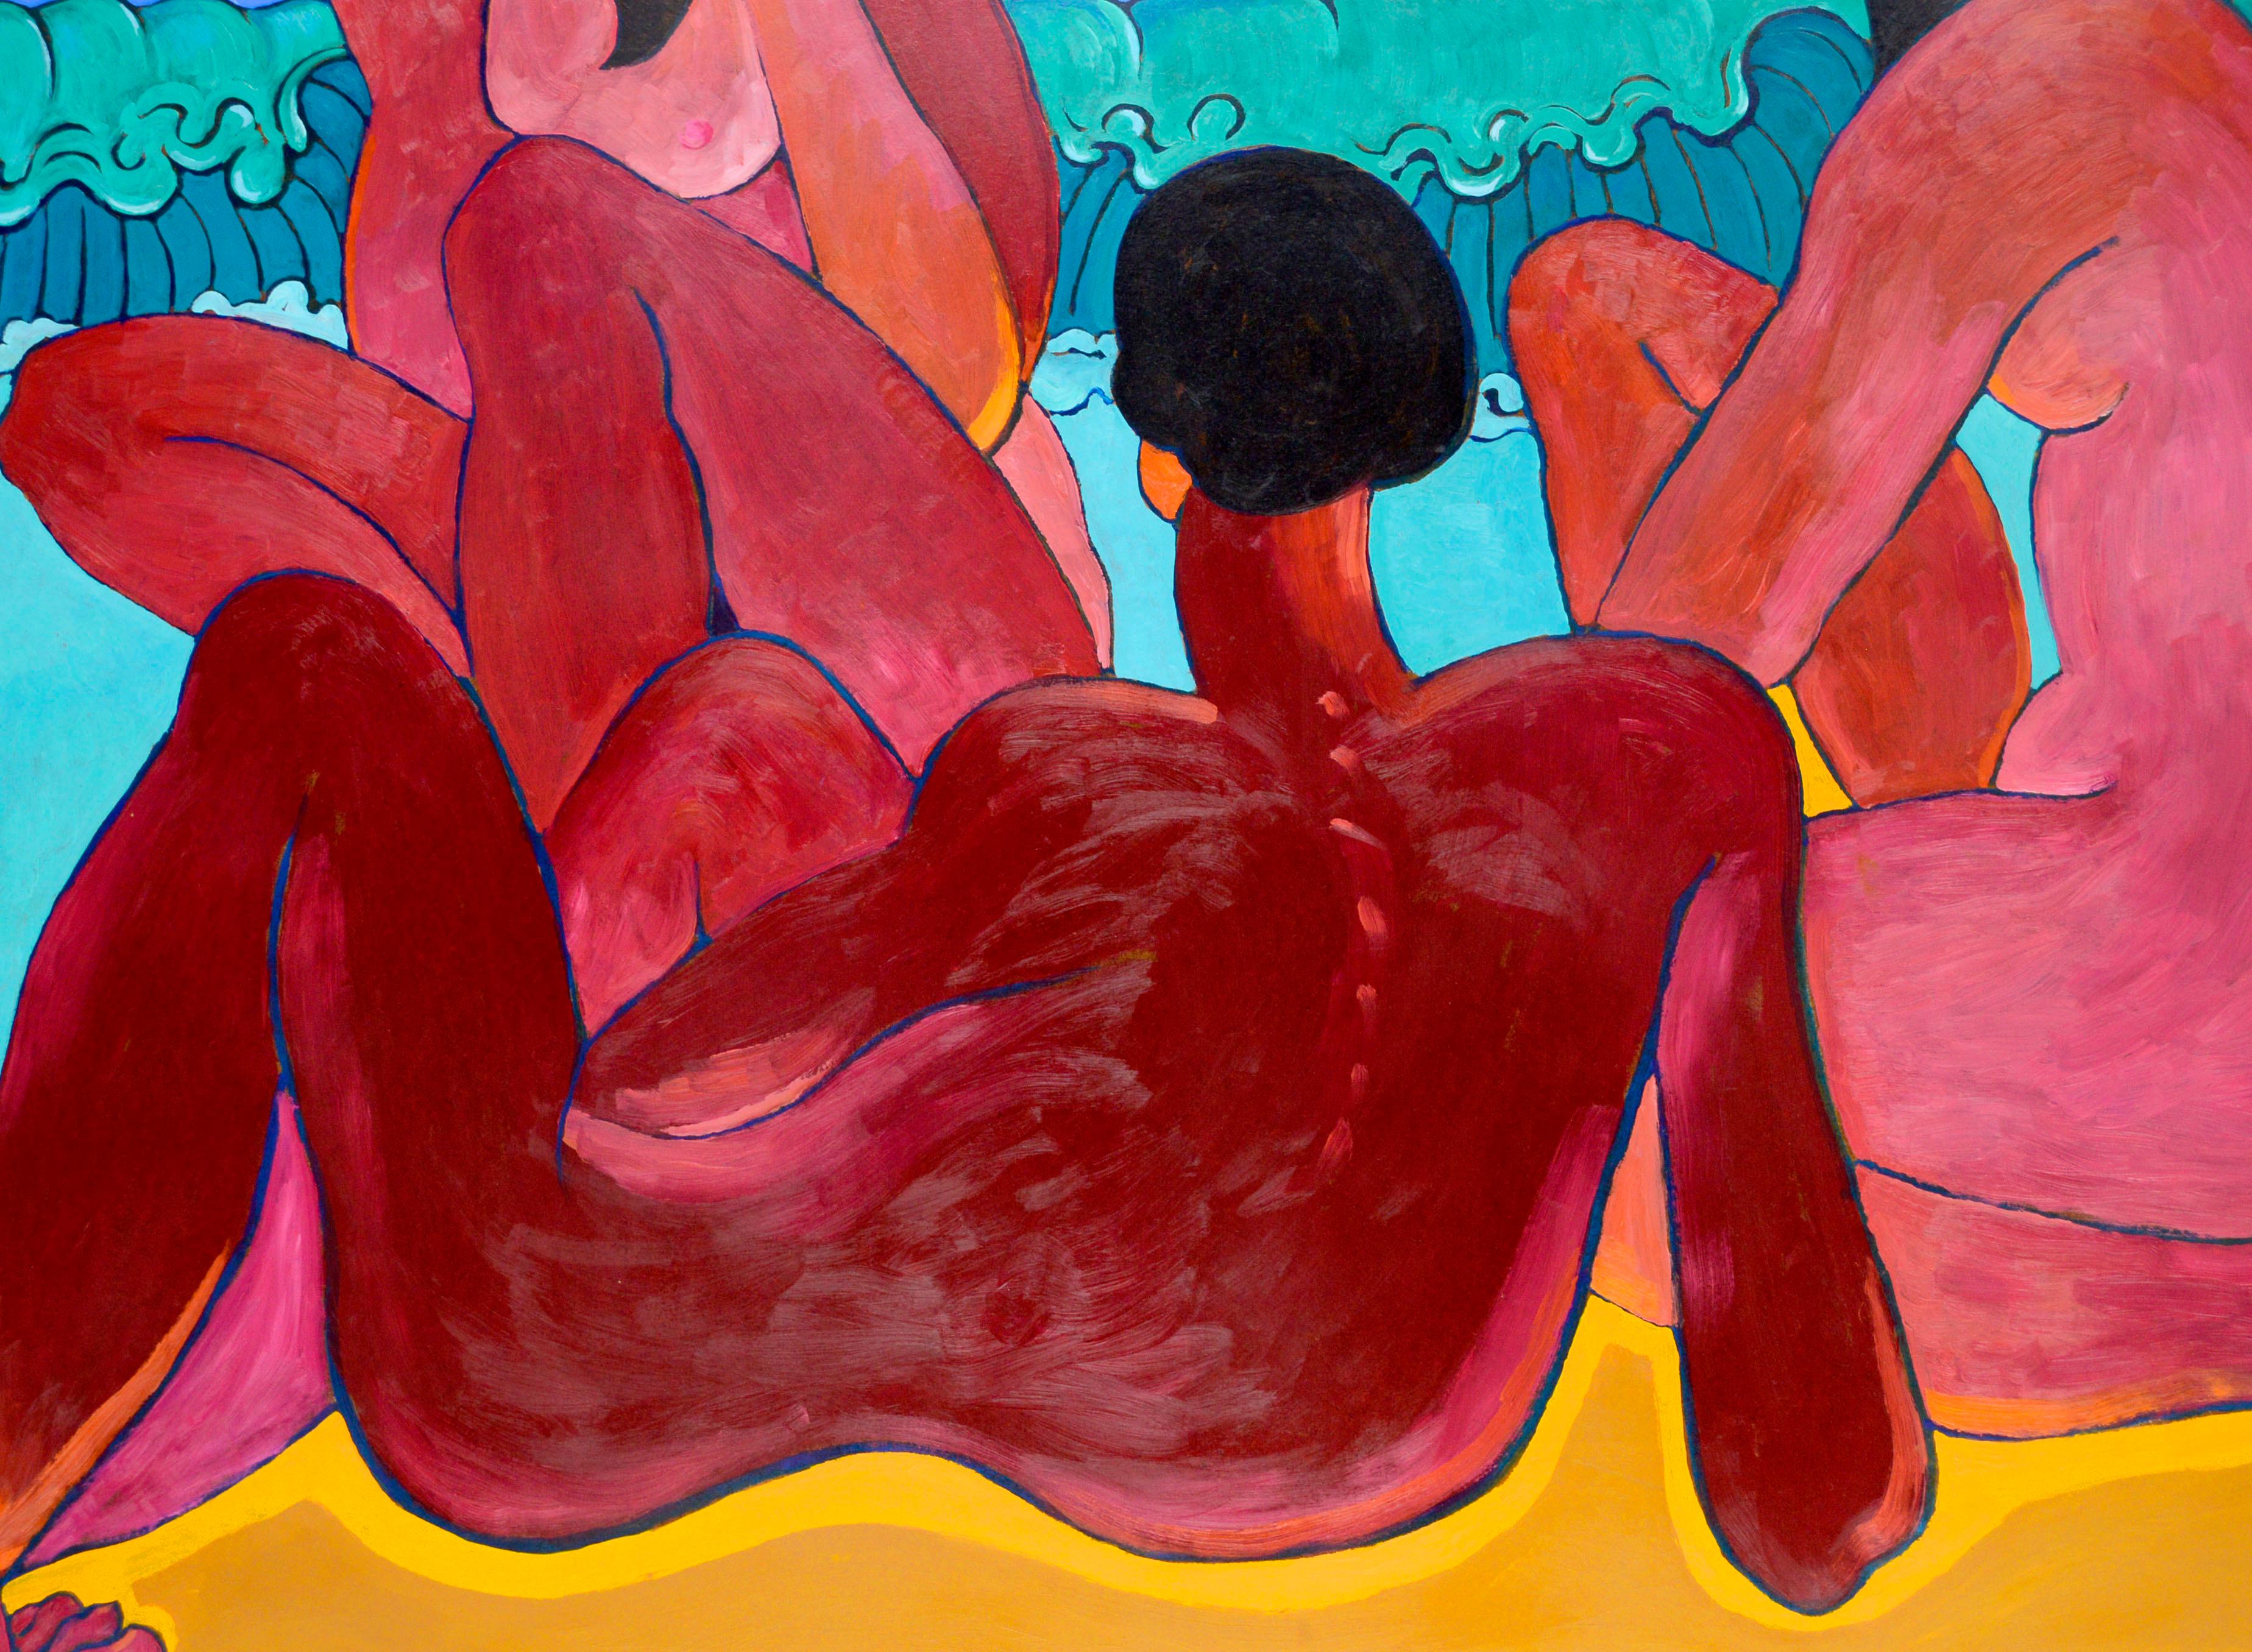 Group of Reclining Bathers - Modernist Nude Figurative Landscape  - Fauvist Painting by Don Klopfer